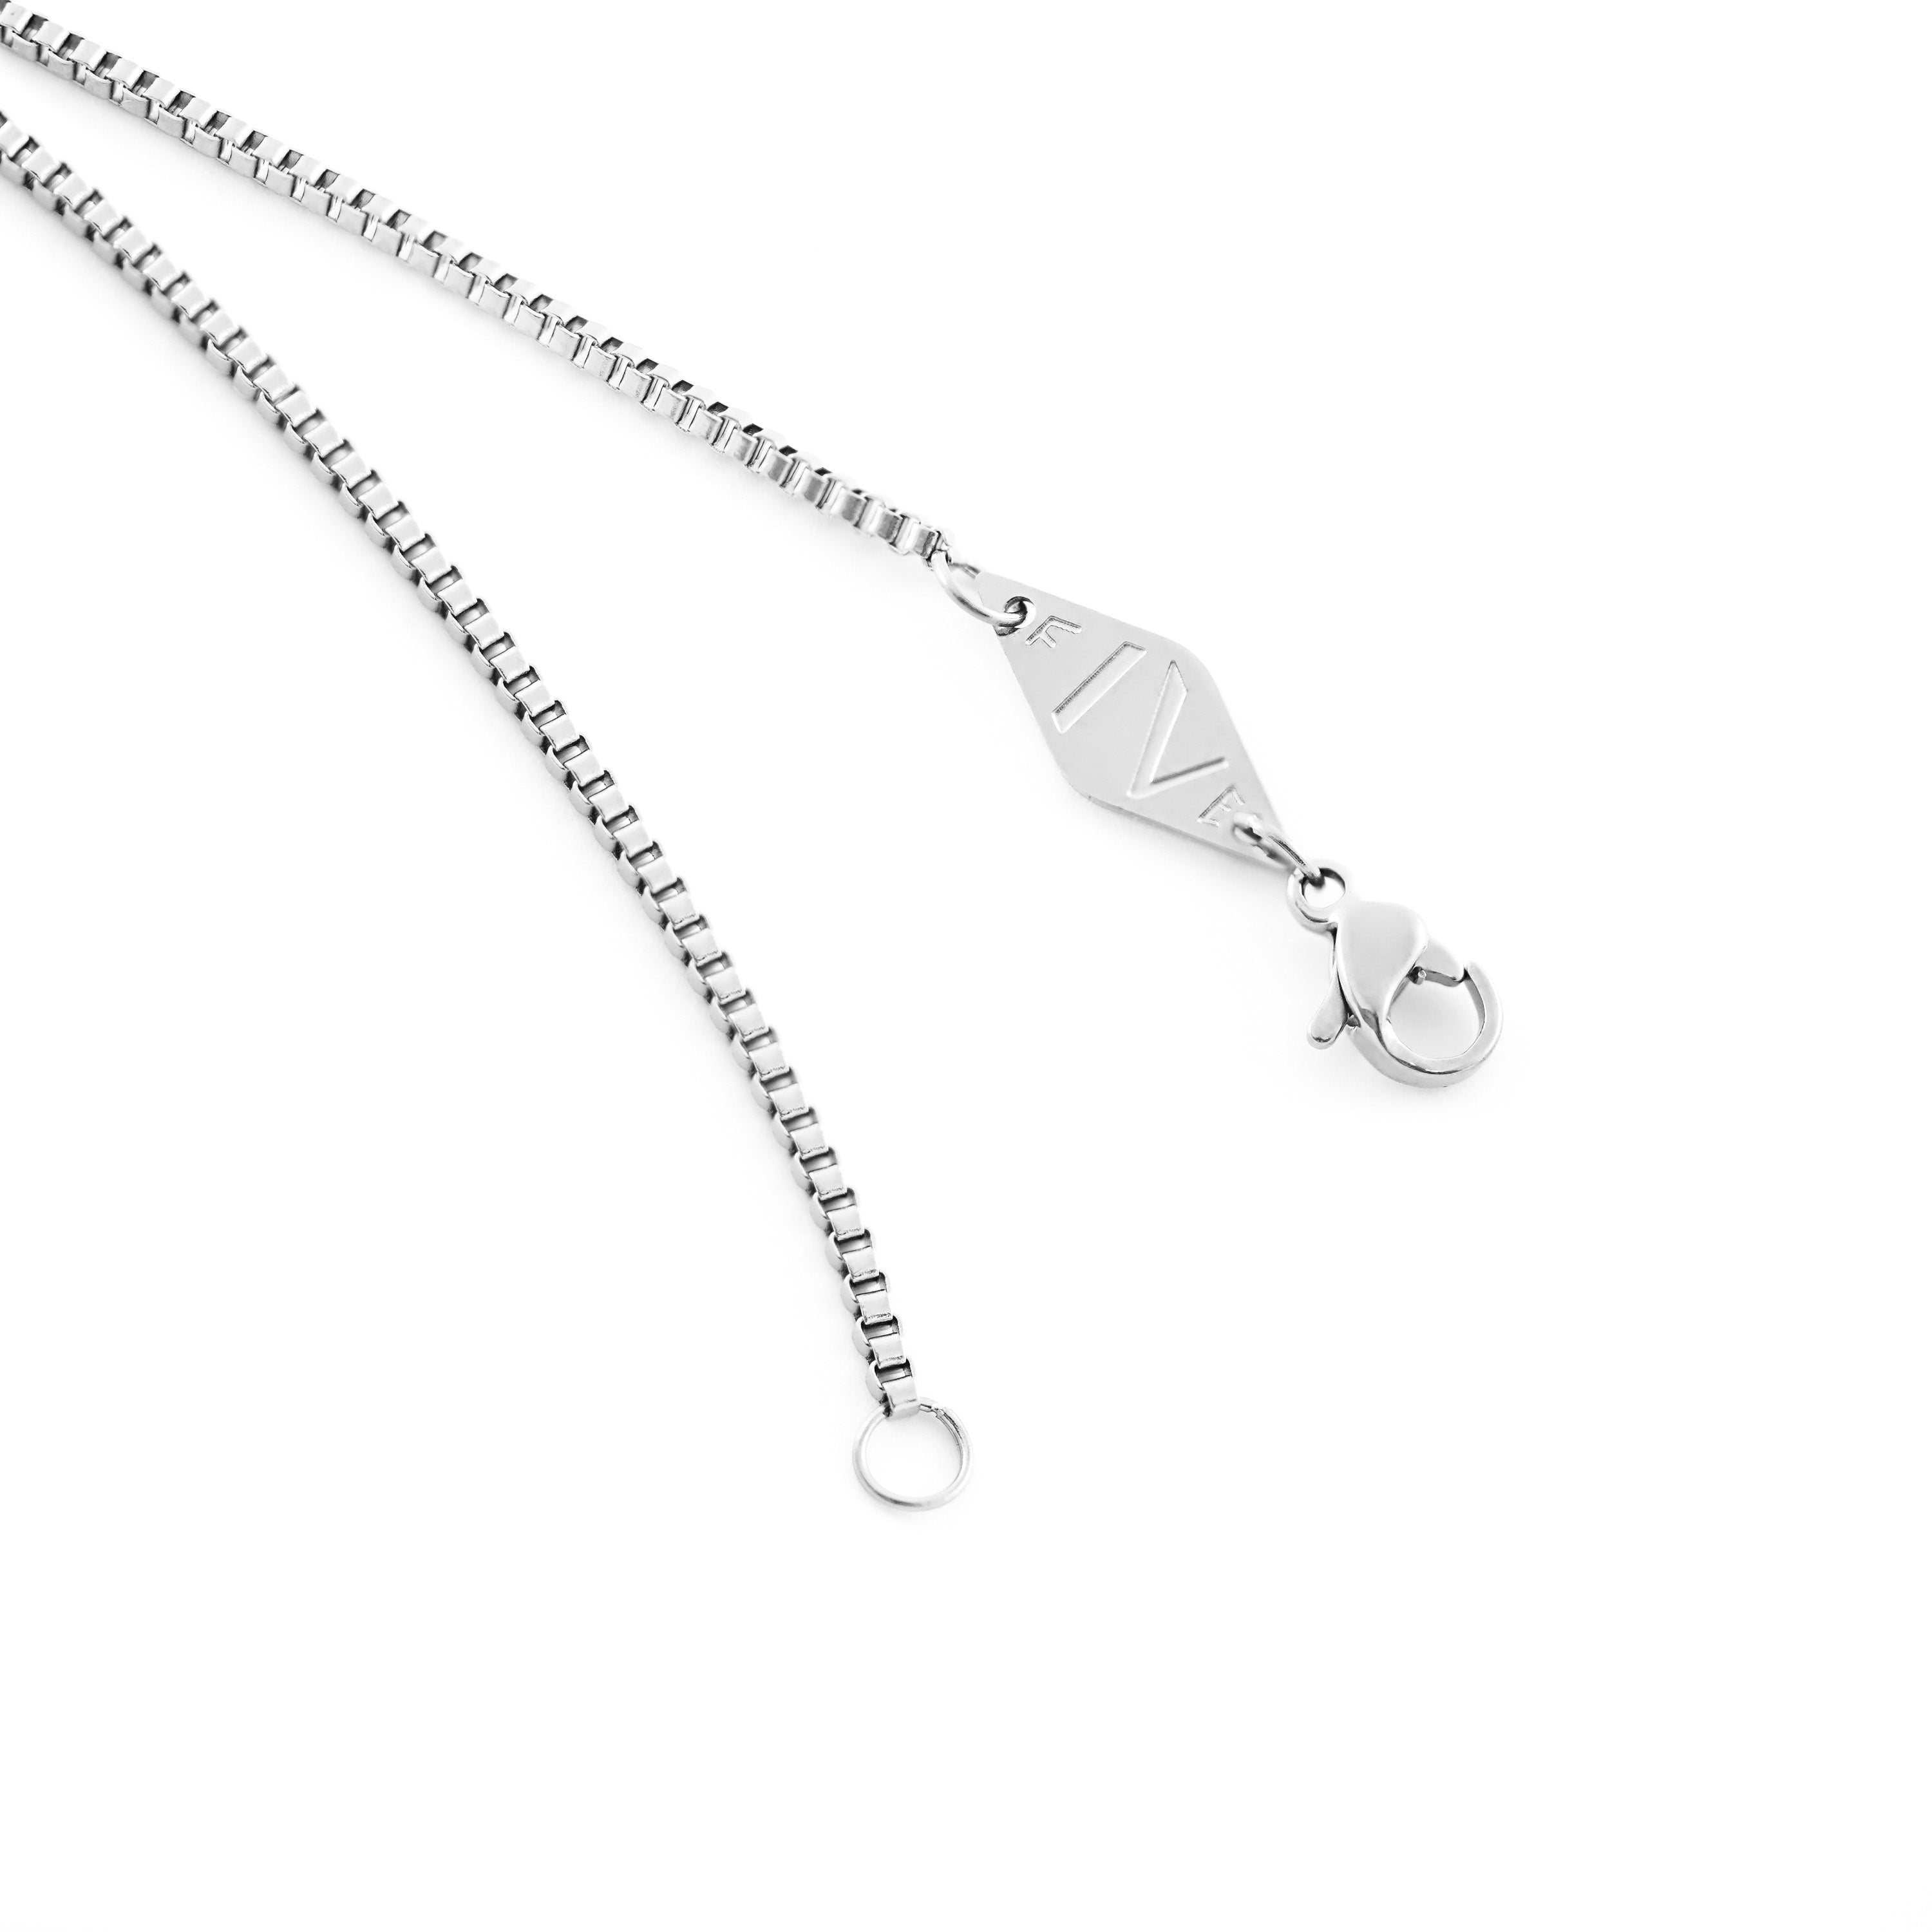 Clyd necklace by Five Jwlry for men, designed in Montreal. Features a 1.5mm square box chain in silver color, highlighted with the brand's signature logo tag.